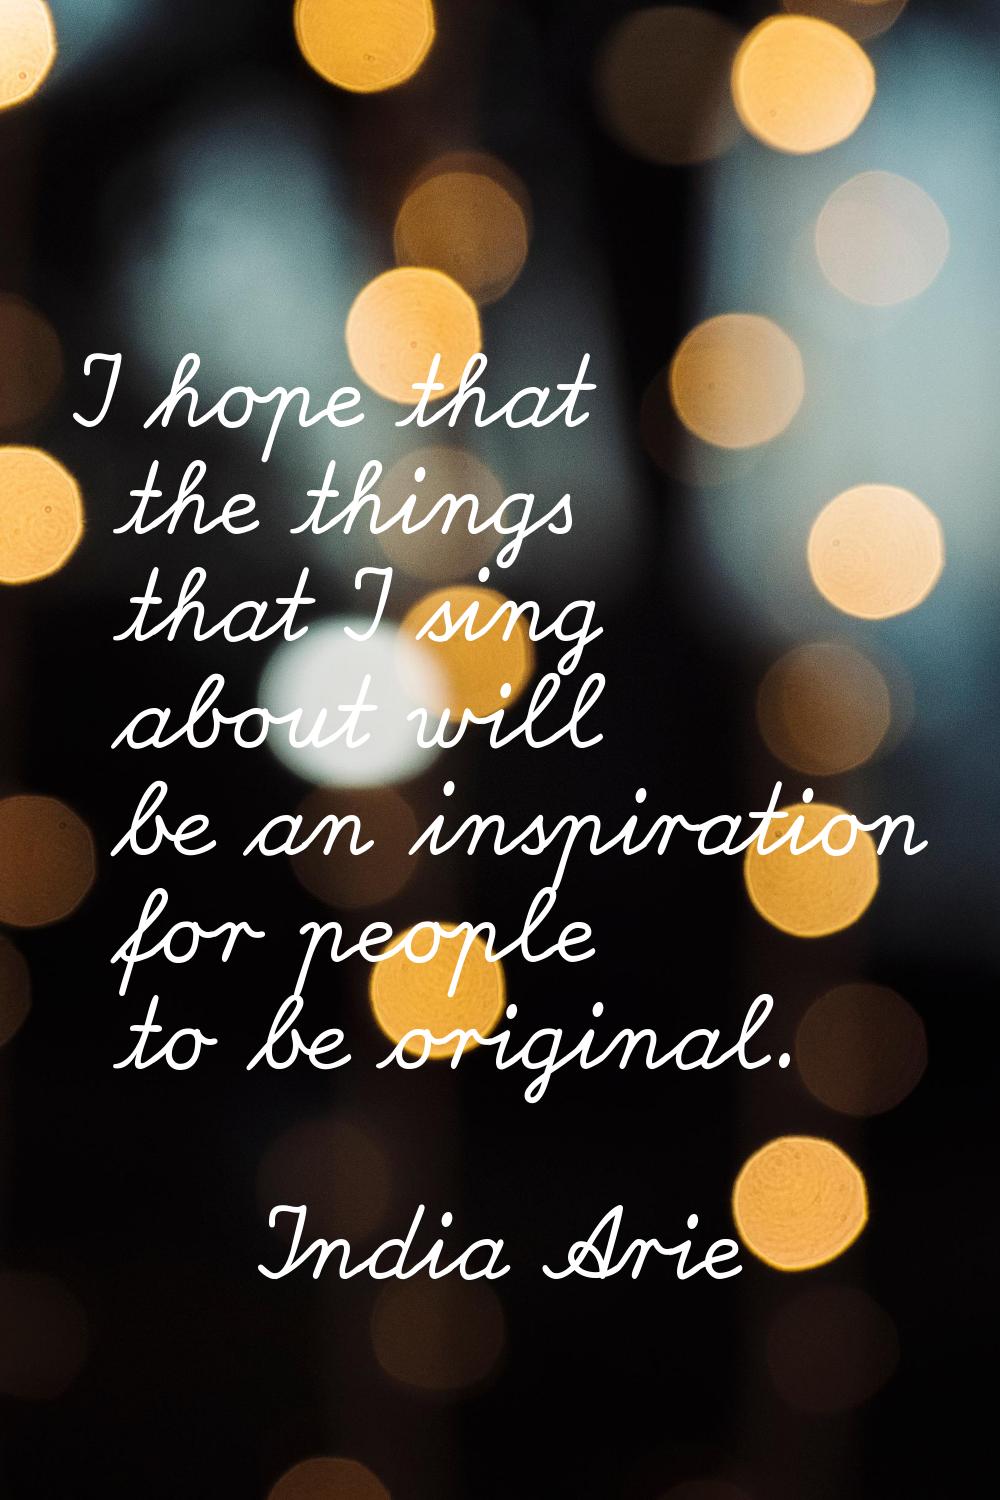 I hope that the things that I sing about will be an inspiration for people to be original.